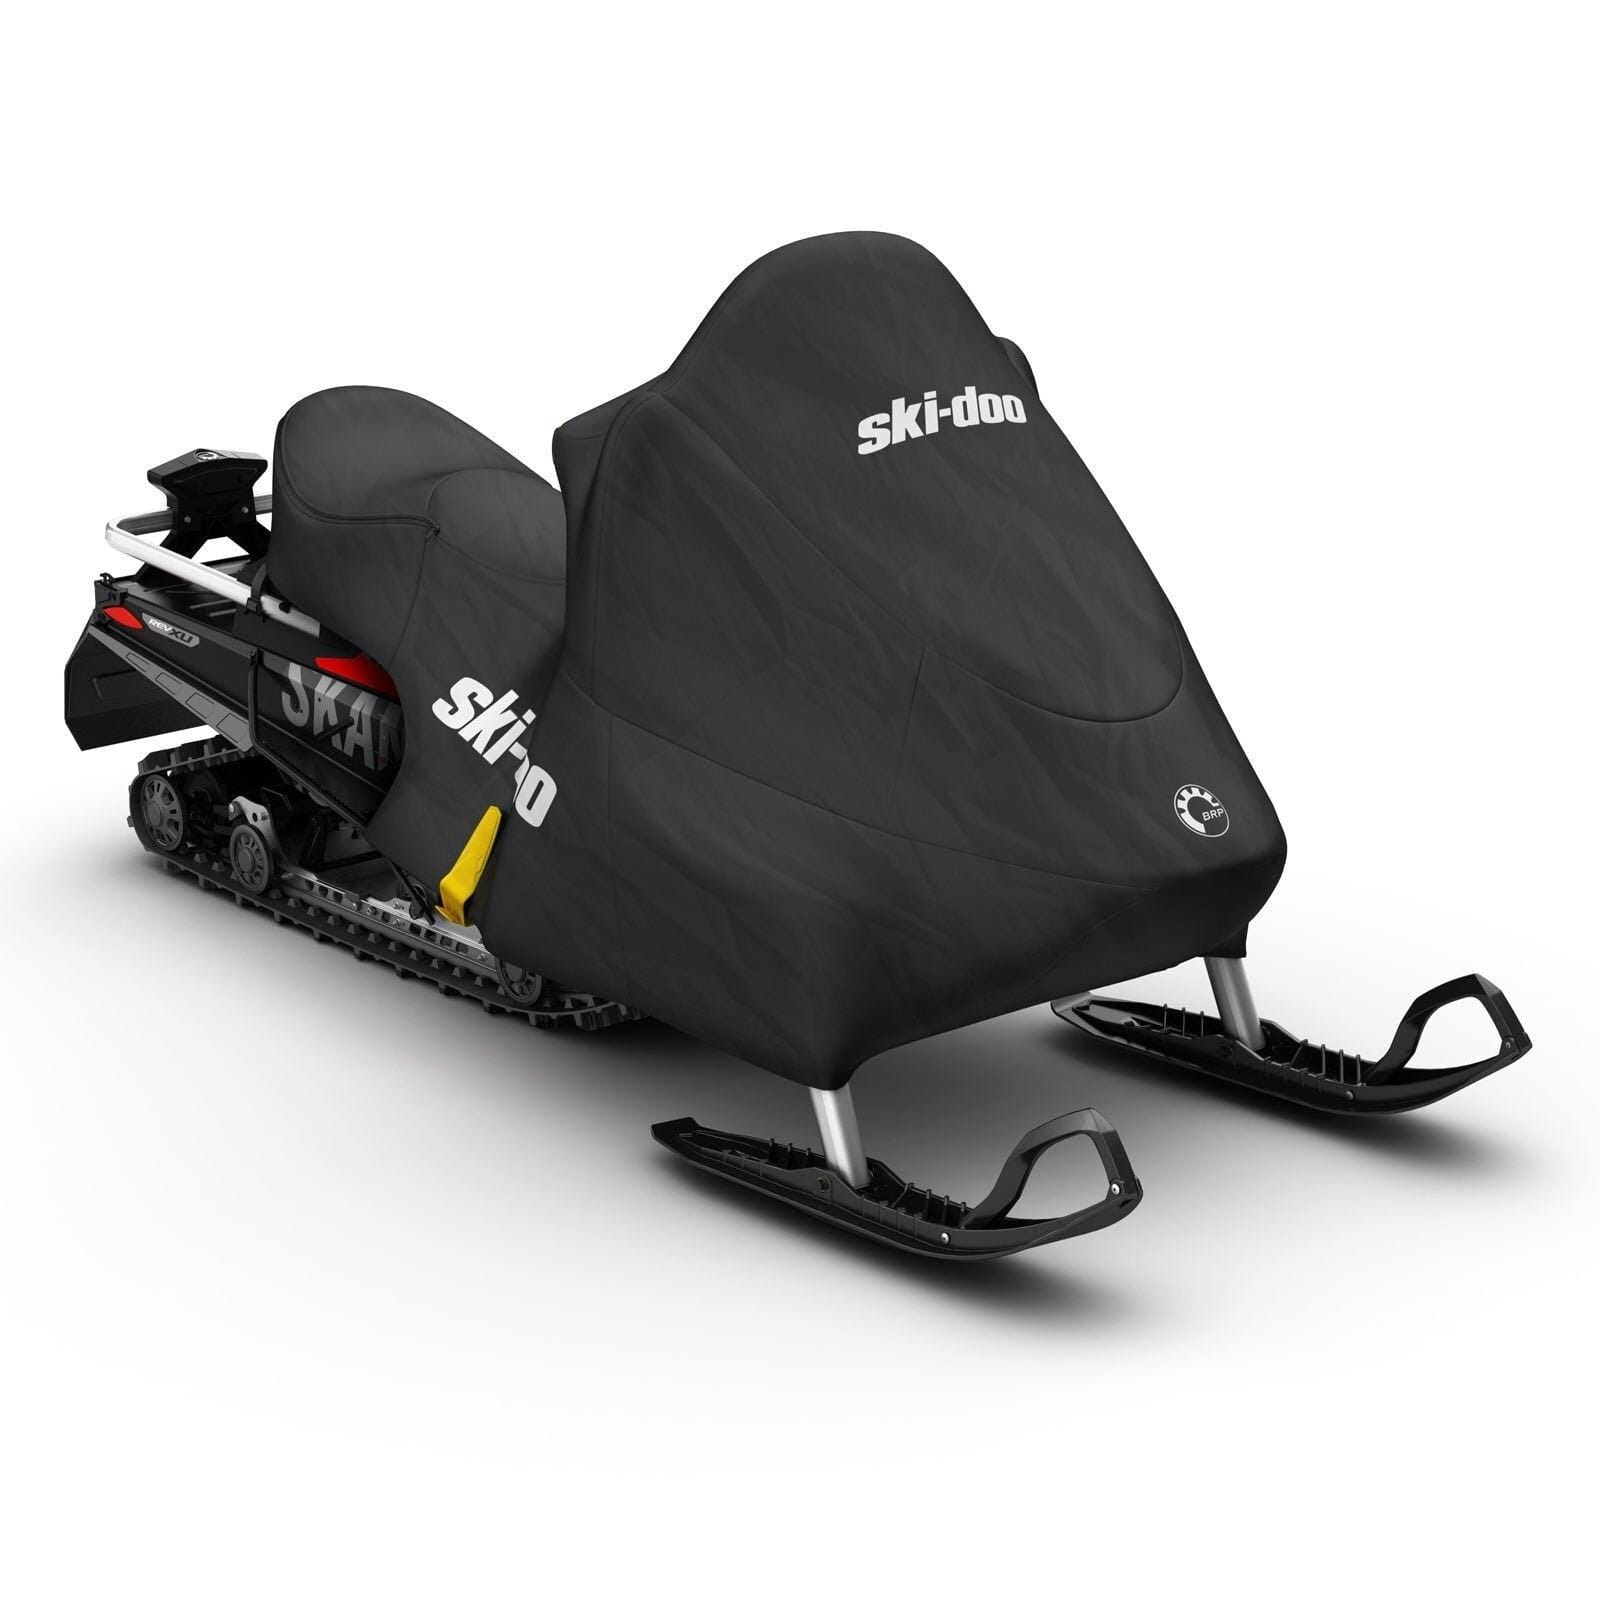 Shop Ski-doo Covers at Propowersports.ca | Propowersports.ca